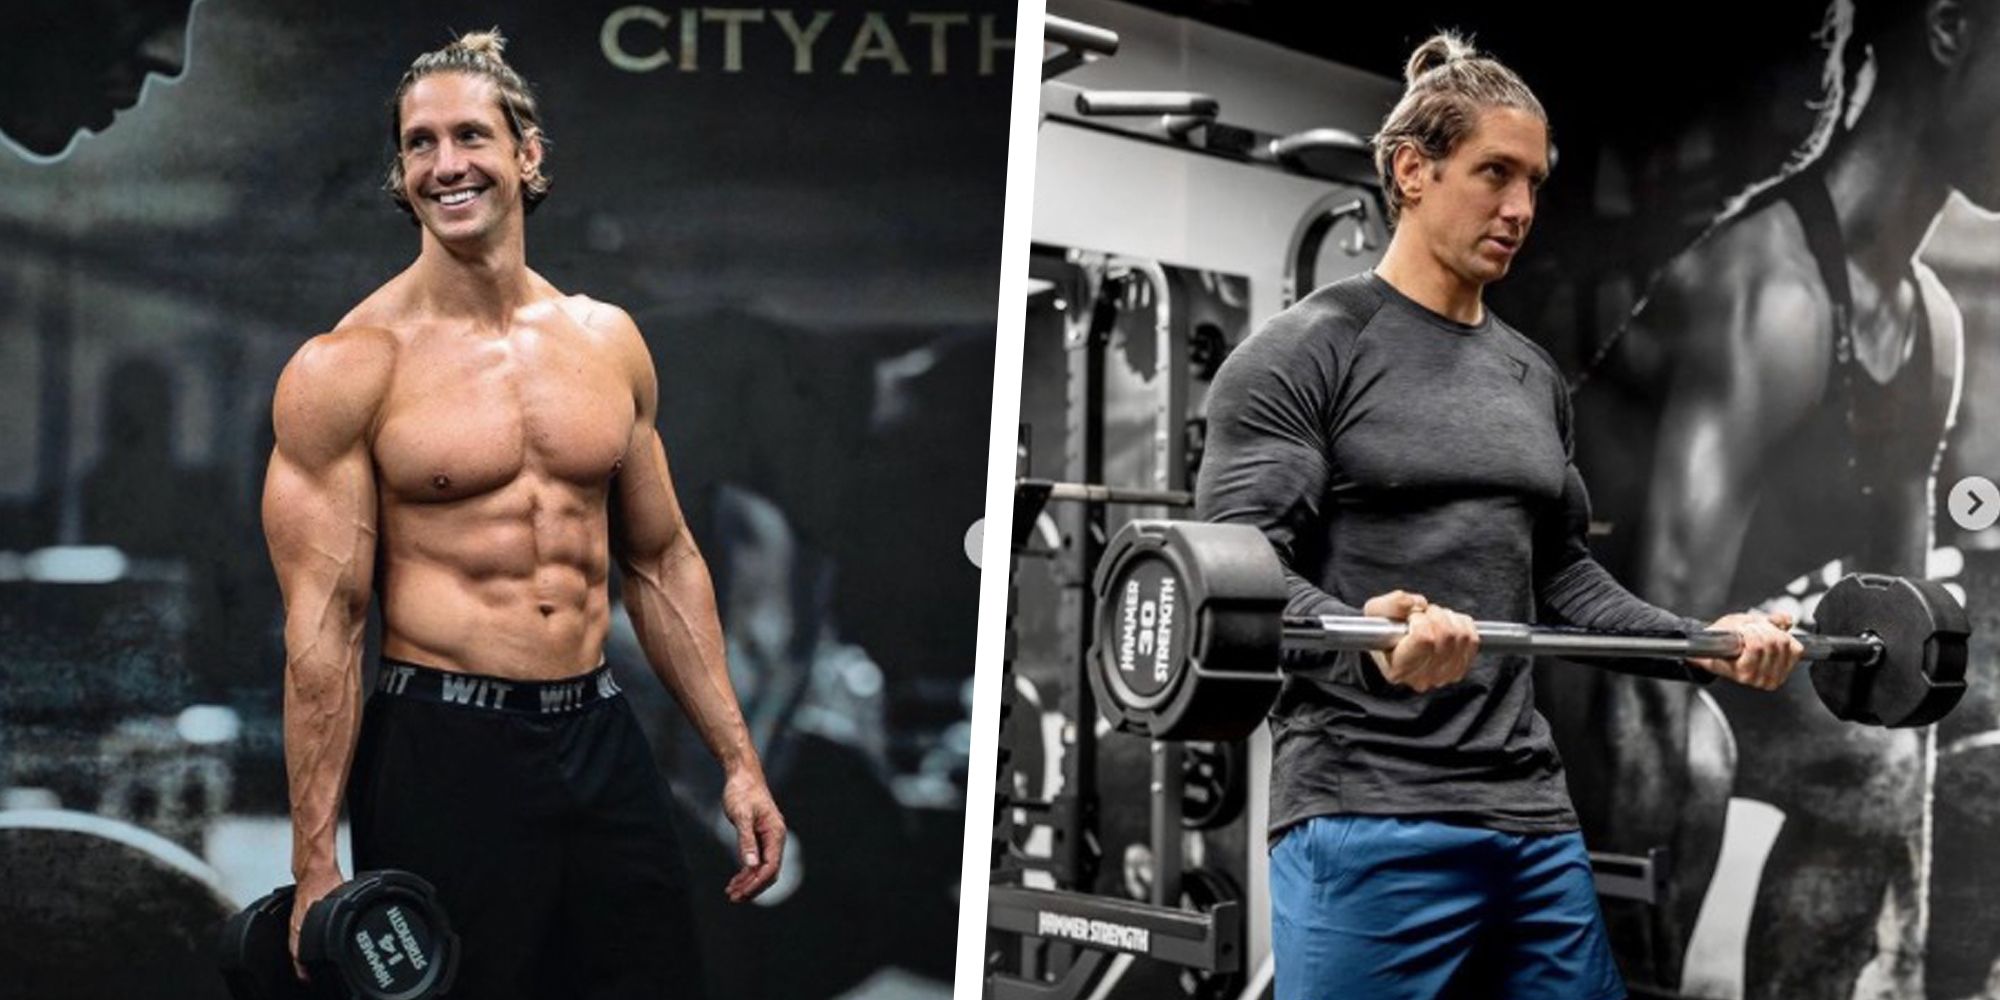 World Champion Fitness Model Shaun Stafford Shares His 20-Minute for Building Muscle